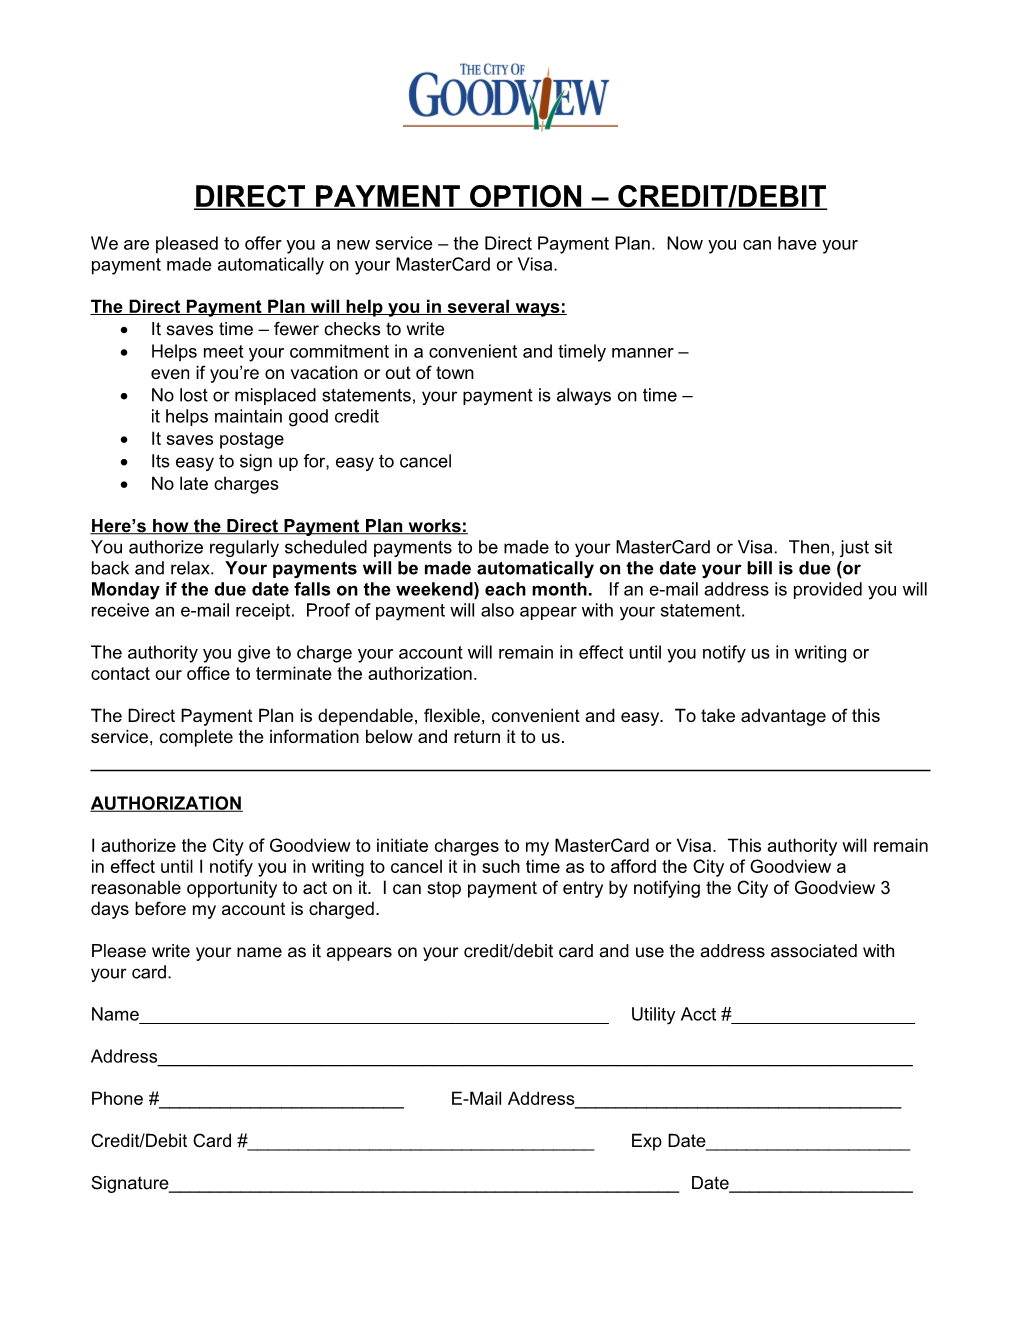 We Are Pleased to Offer You a New Service the Direct Payment Plan